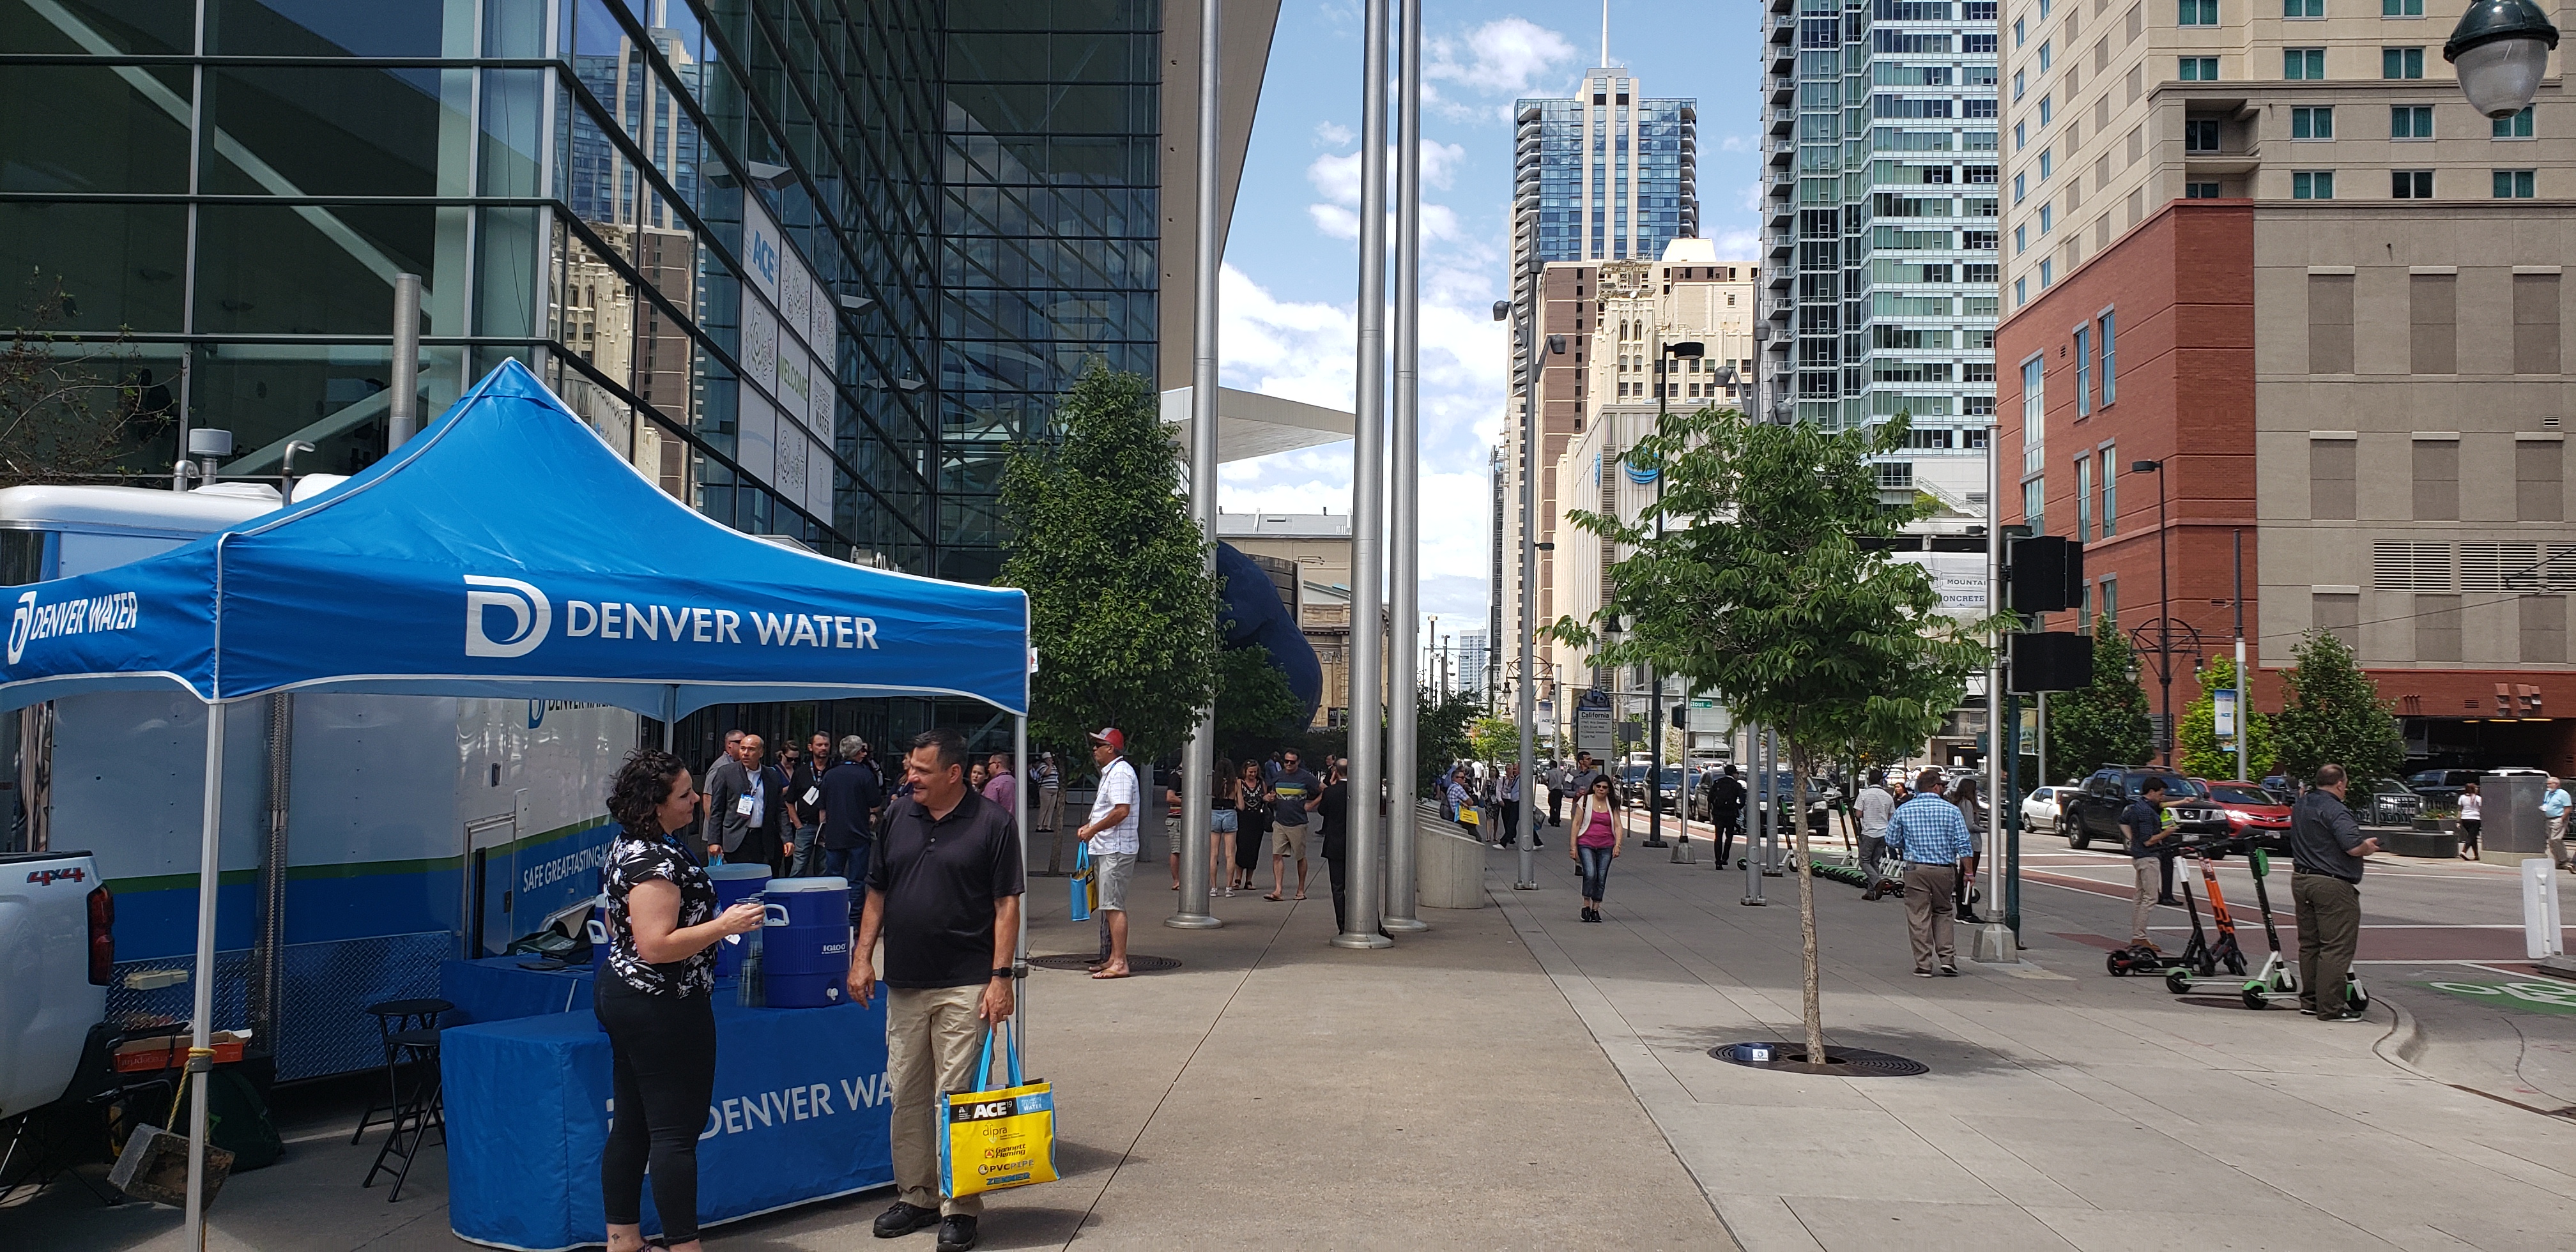 A Denver Water tent on the sidewalk of a busy city street.